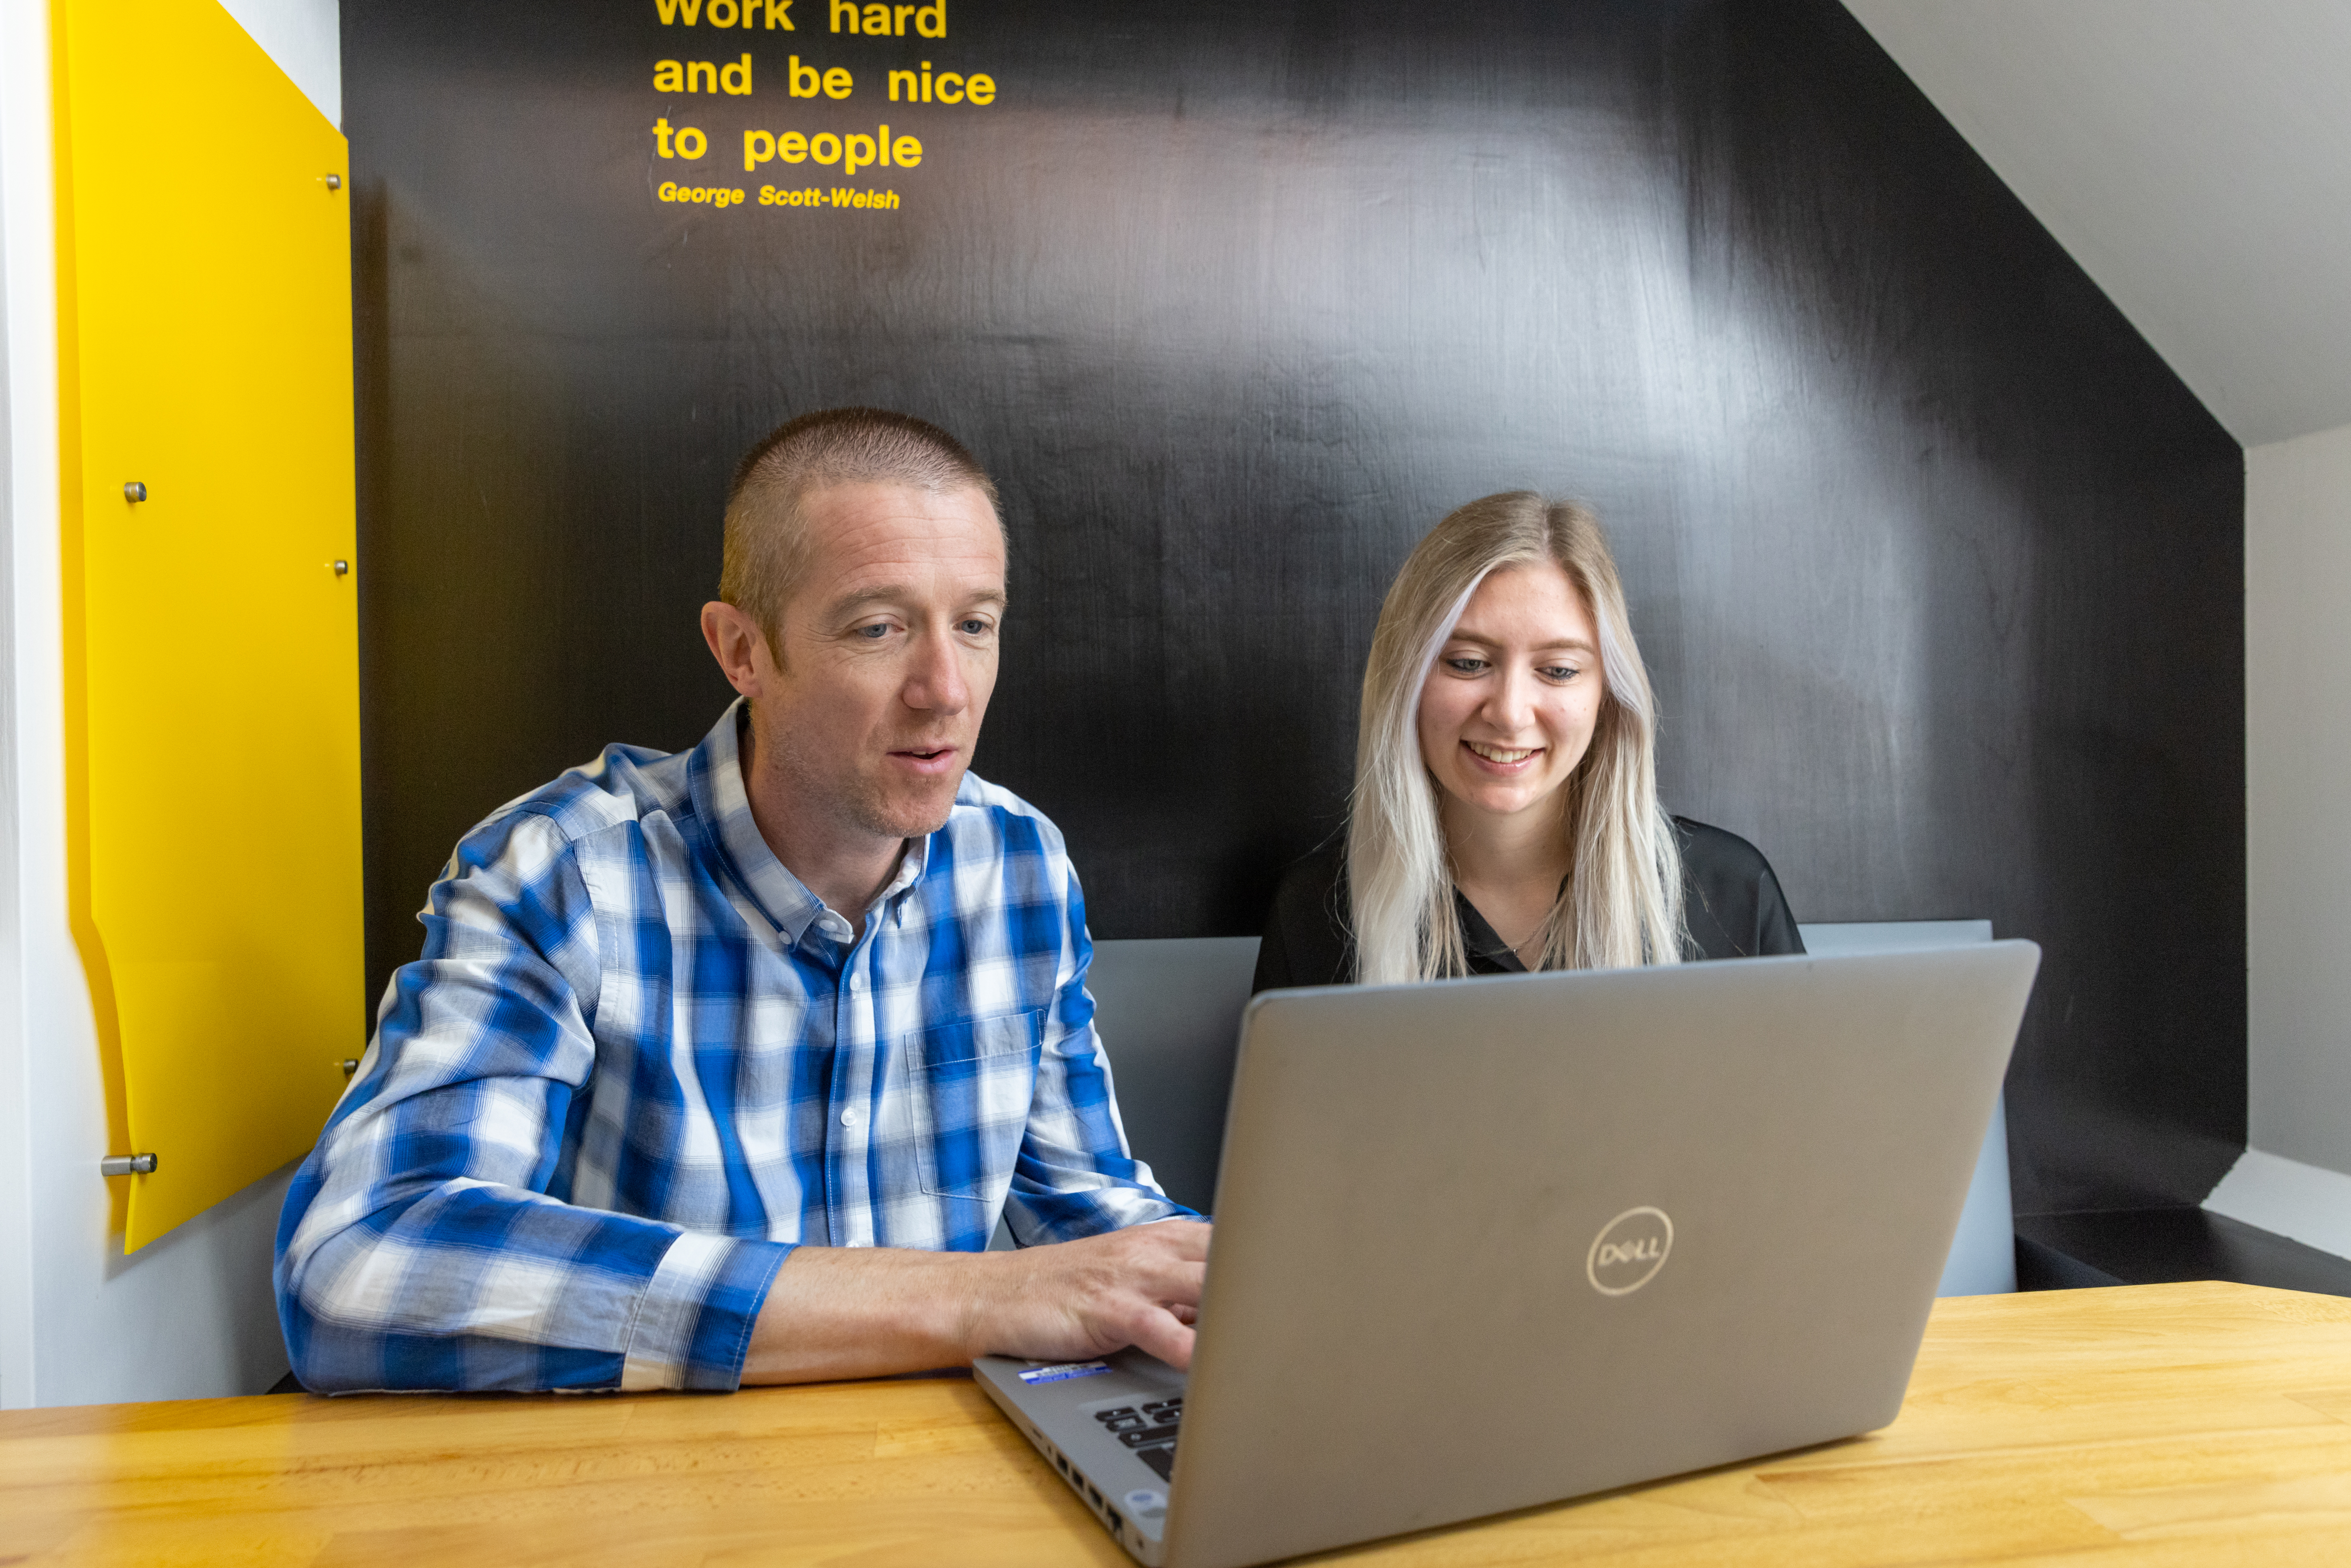 Two people in front of a computer